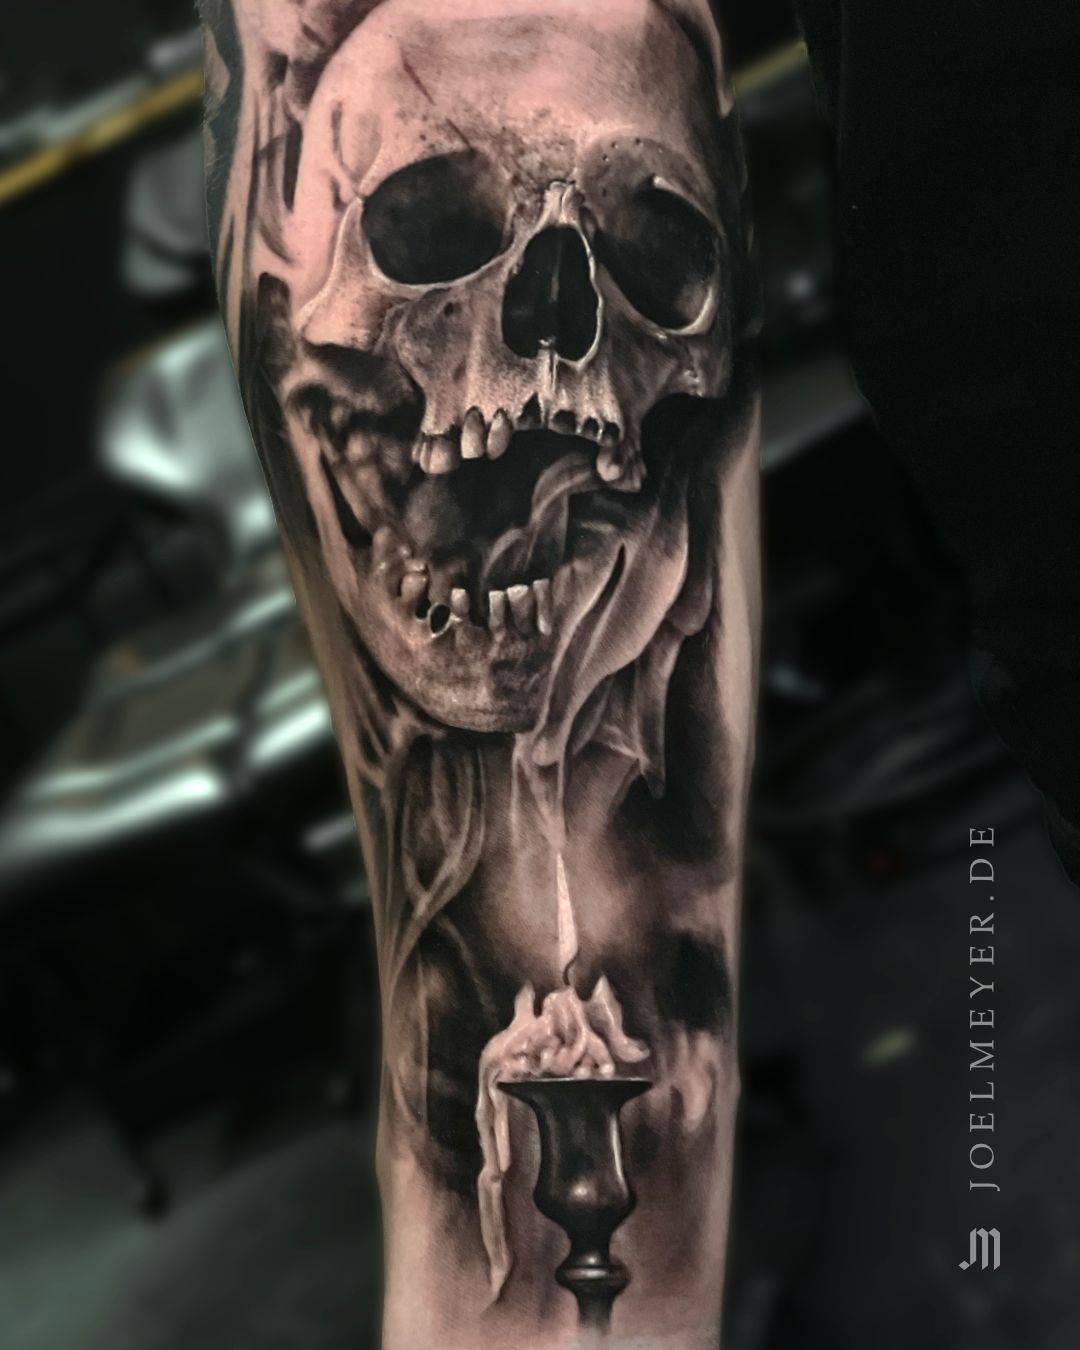 Top 155 Best Realism Tattoo Ideas 2021 Inspiration Guide  Candle tattoo  Cool tattoos for guys Tattoos for guys